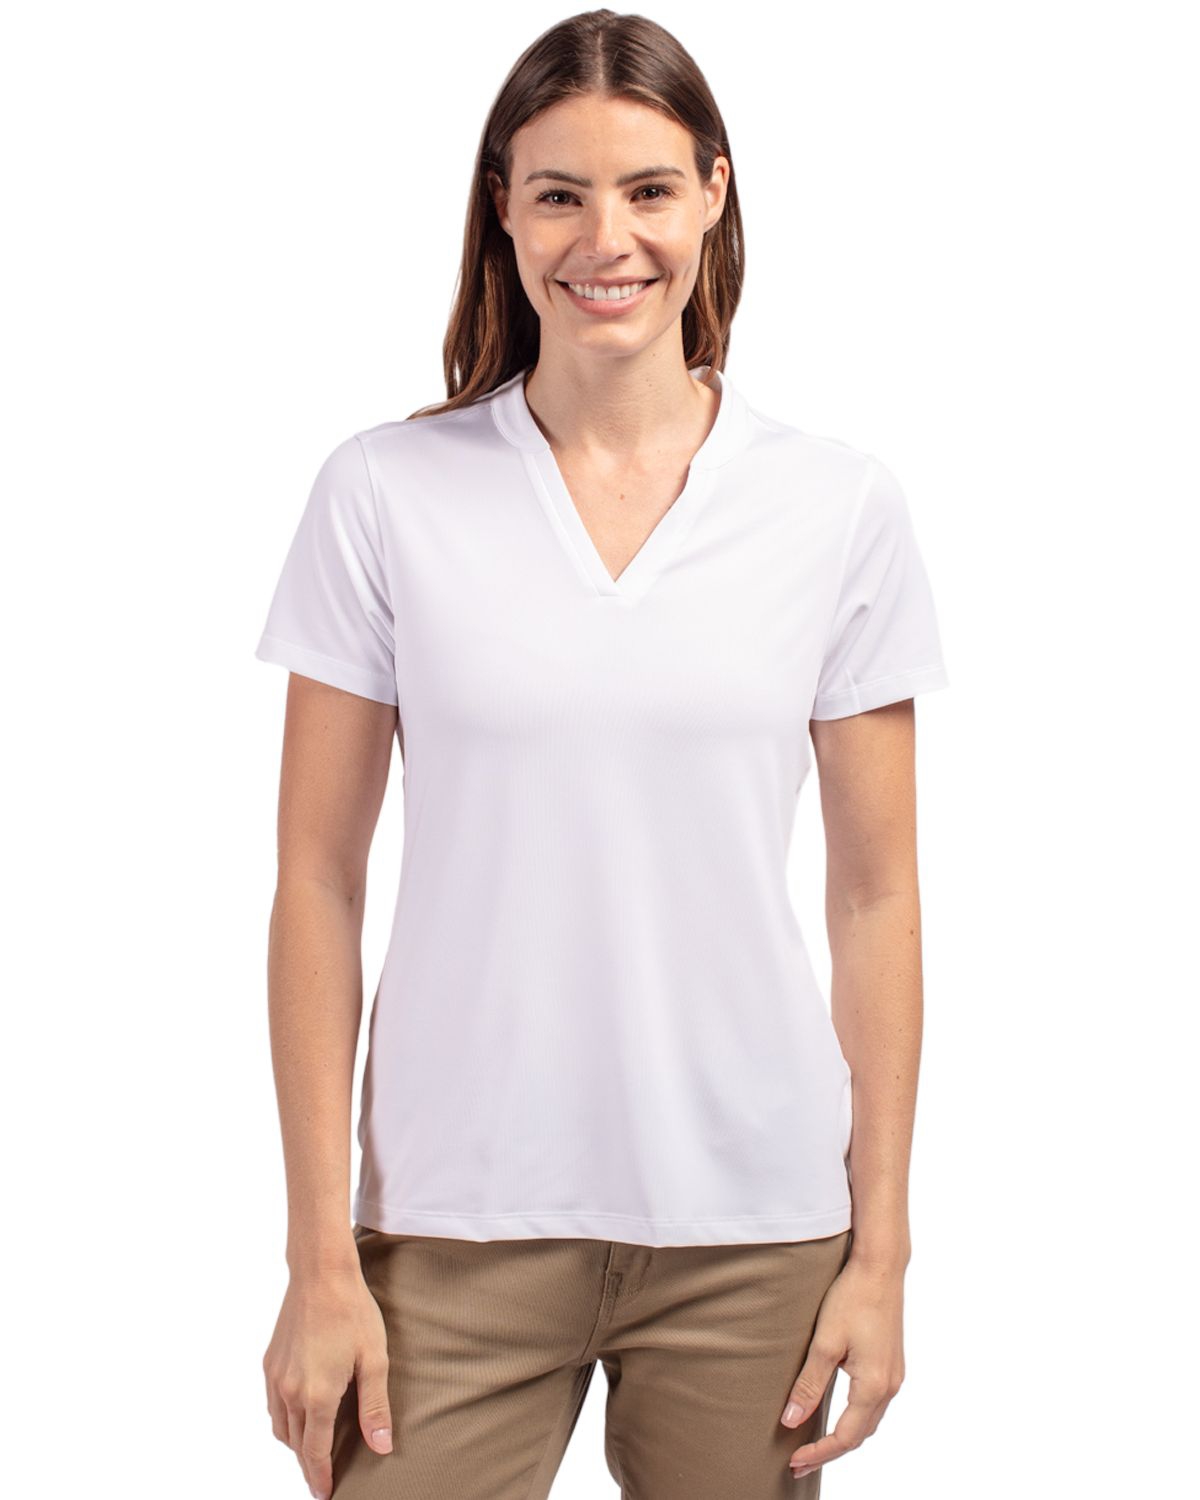 Cutter Buck Forge Heathered Stretch Women's Blade Top - White